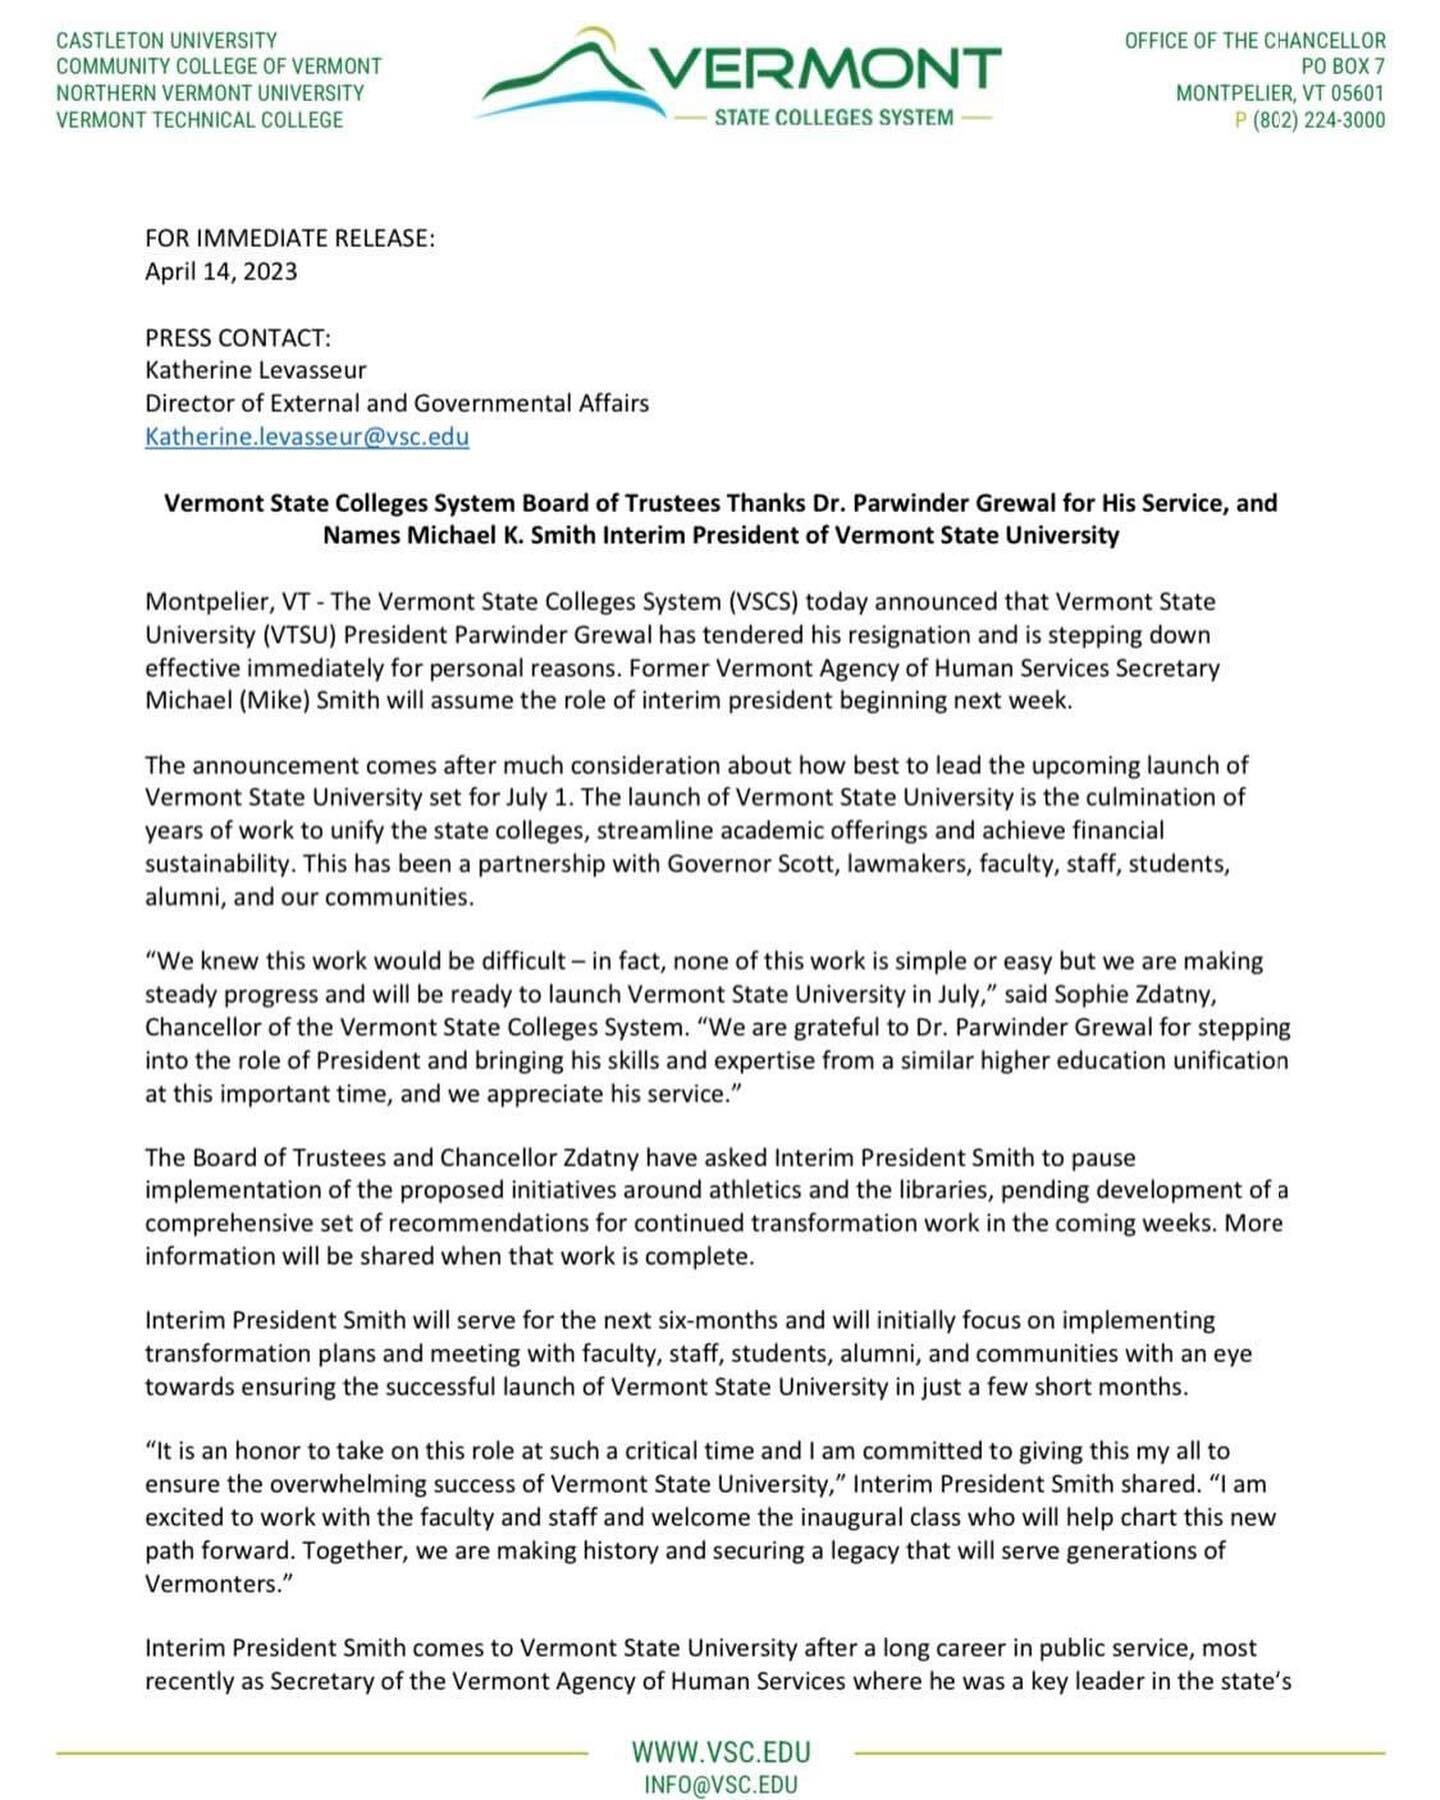 Update on our Vermont State Colleges libraries:

Today, it was announced that Dr. Parwinder Grewal resigned as President and &ldquo;the Board of Trustees and Chancellor Zdatny have asked [the] Interim President to pause implementation of the proposed